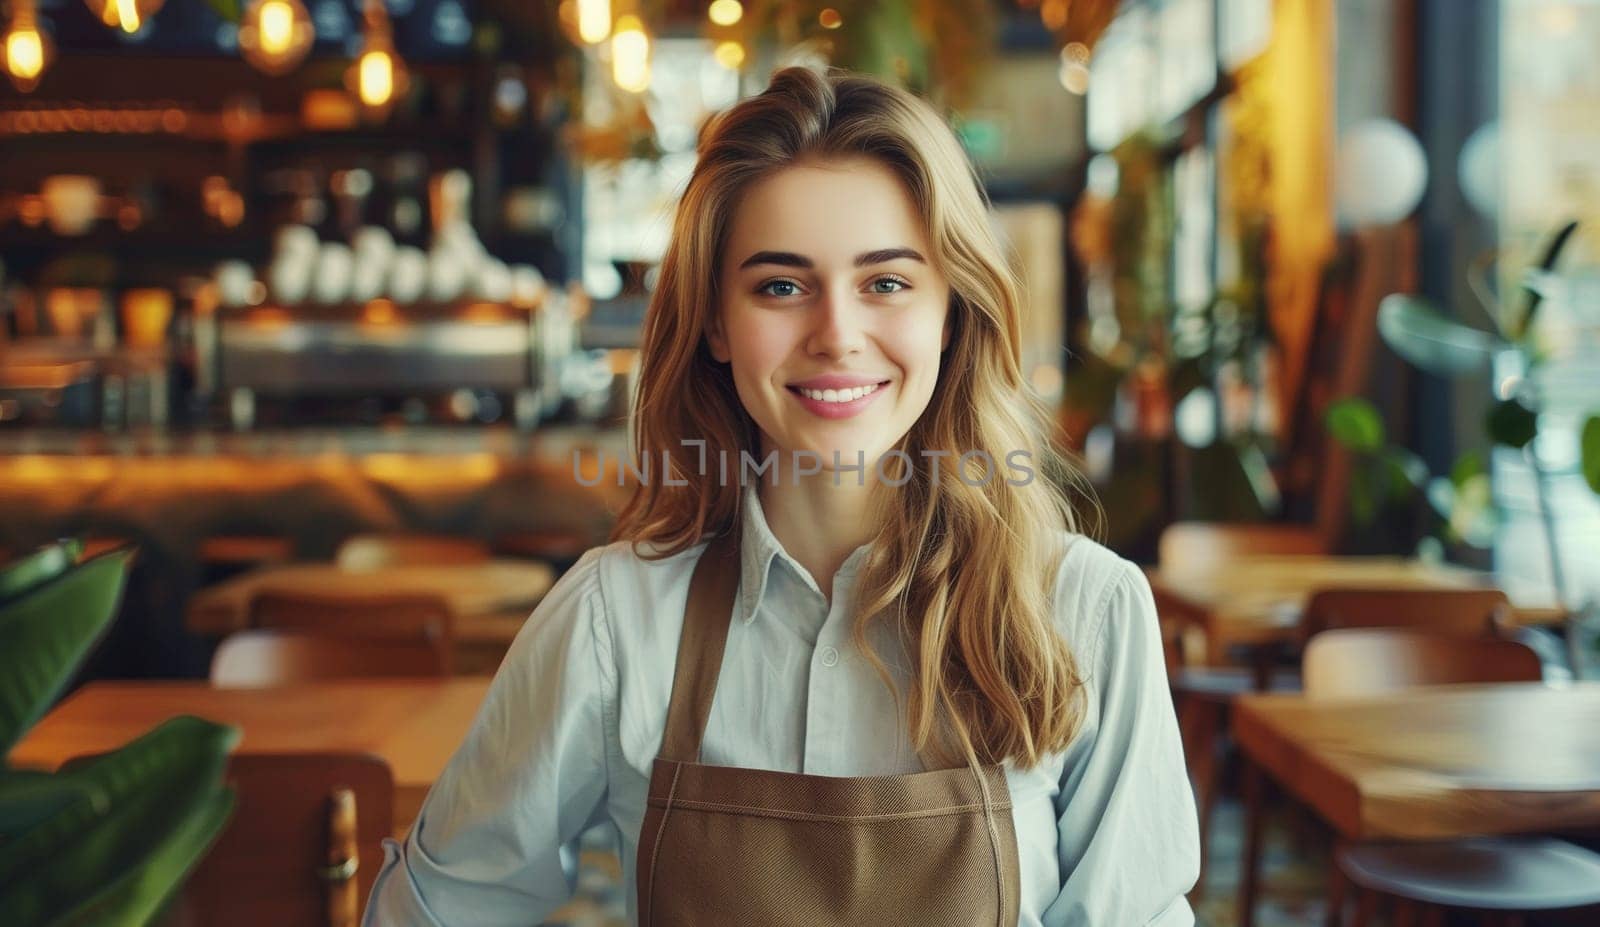 Portrait of happy smiling woman barista, coffee house or cafe worker, young waiter working in coffee shop, looking at camera